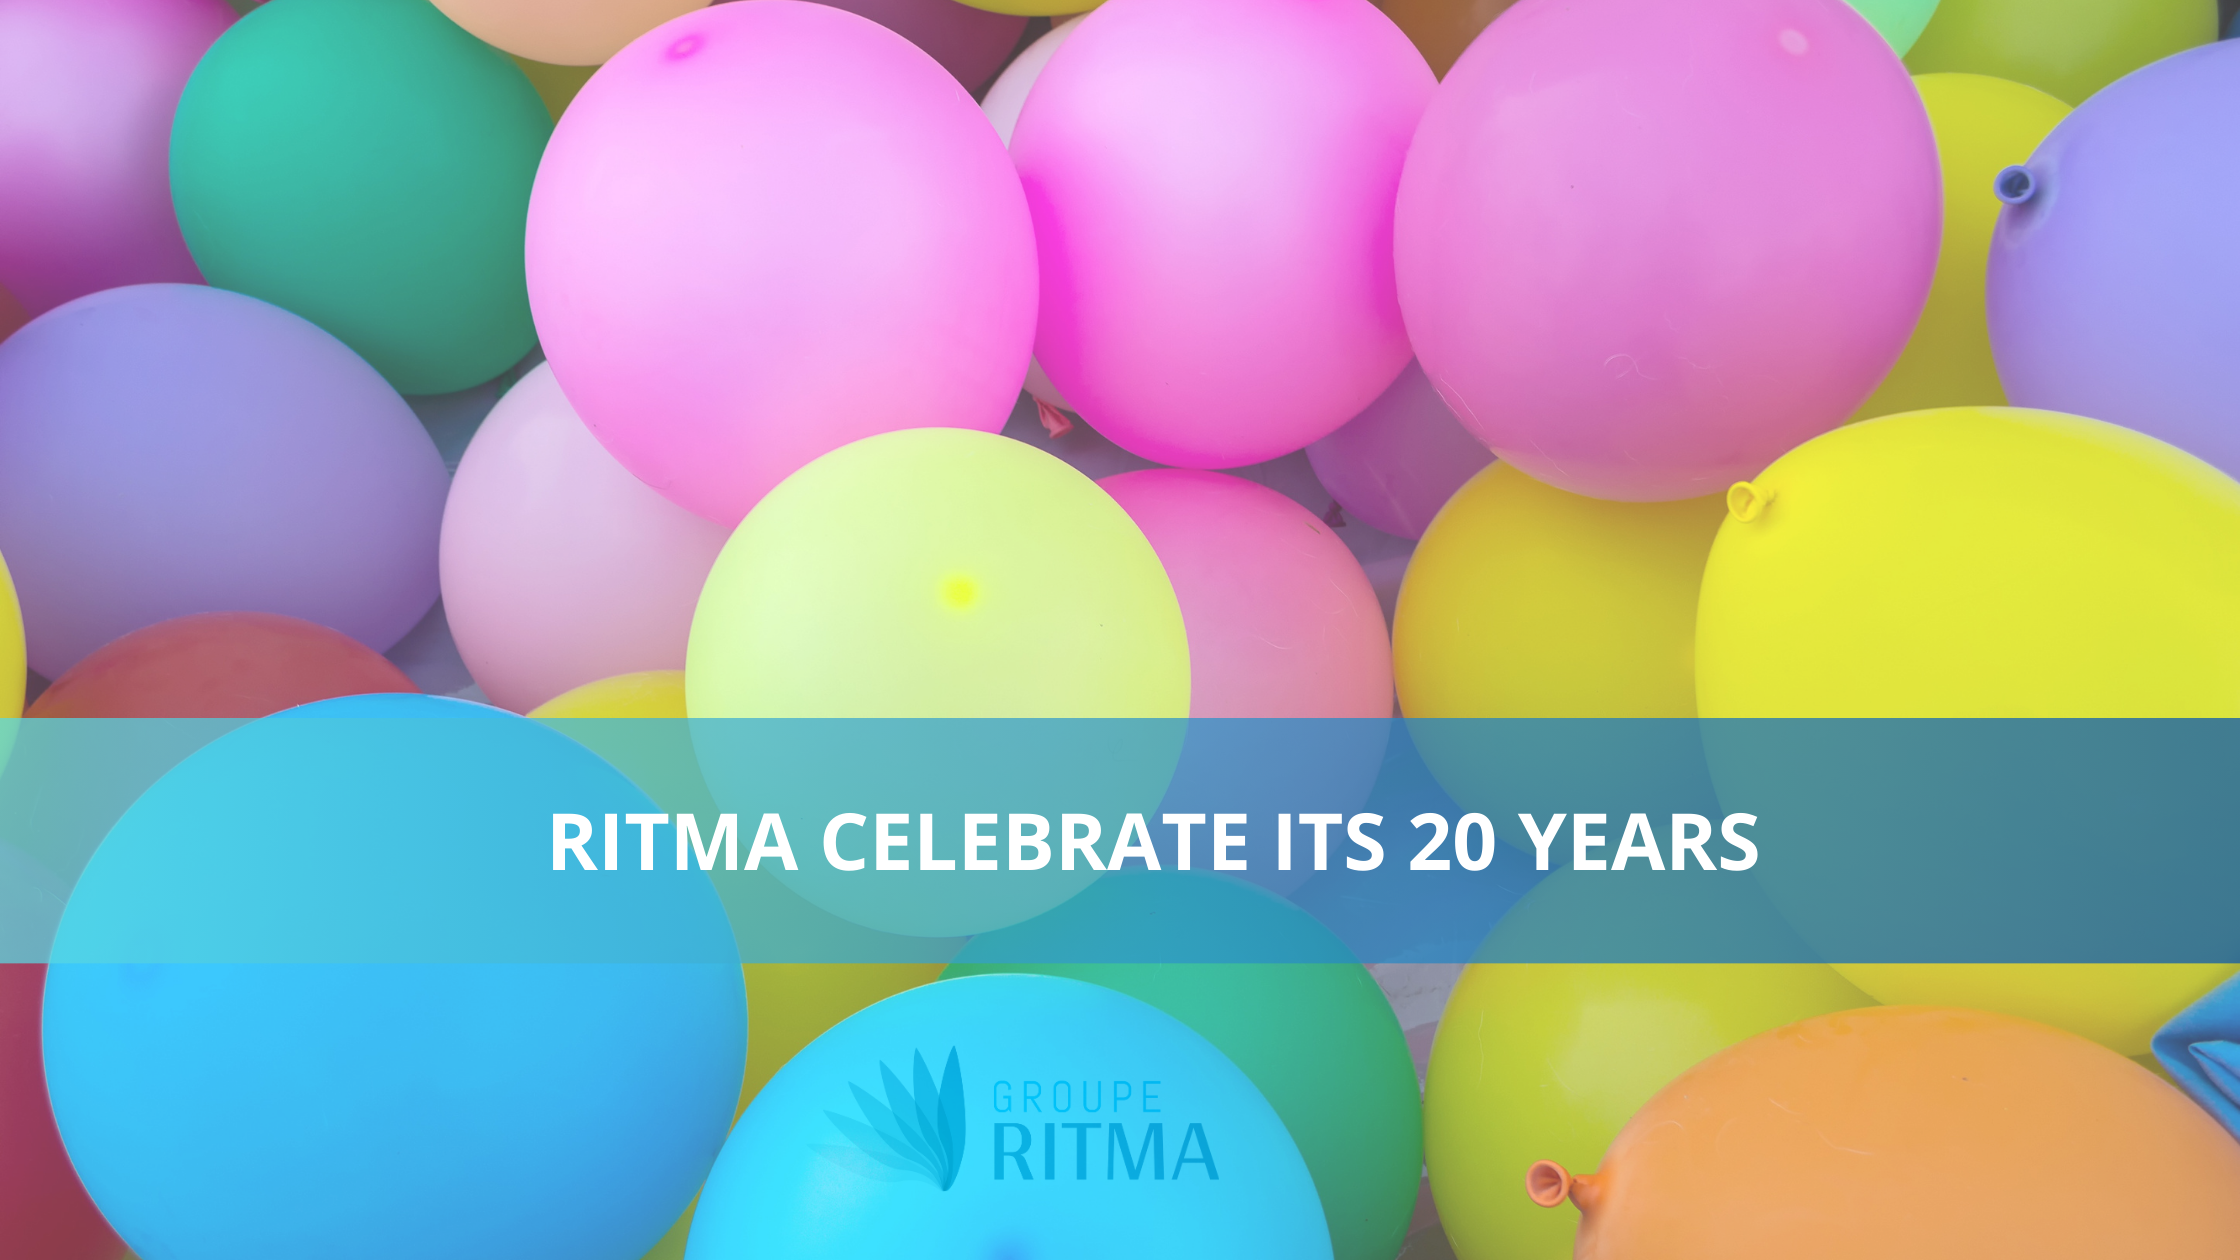 RITMA GROUP IS CELEBRATING 20 YEARS OF SERVICES!